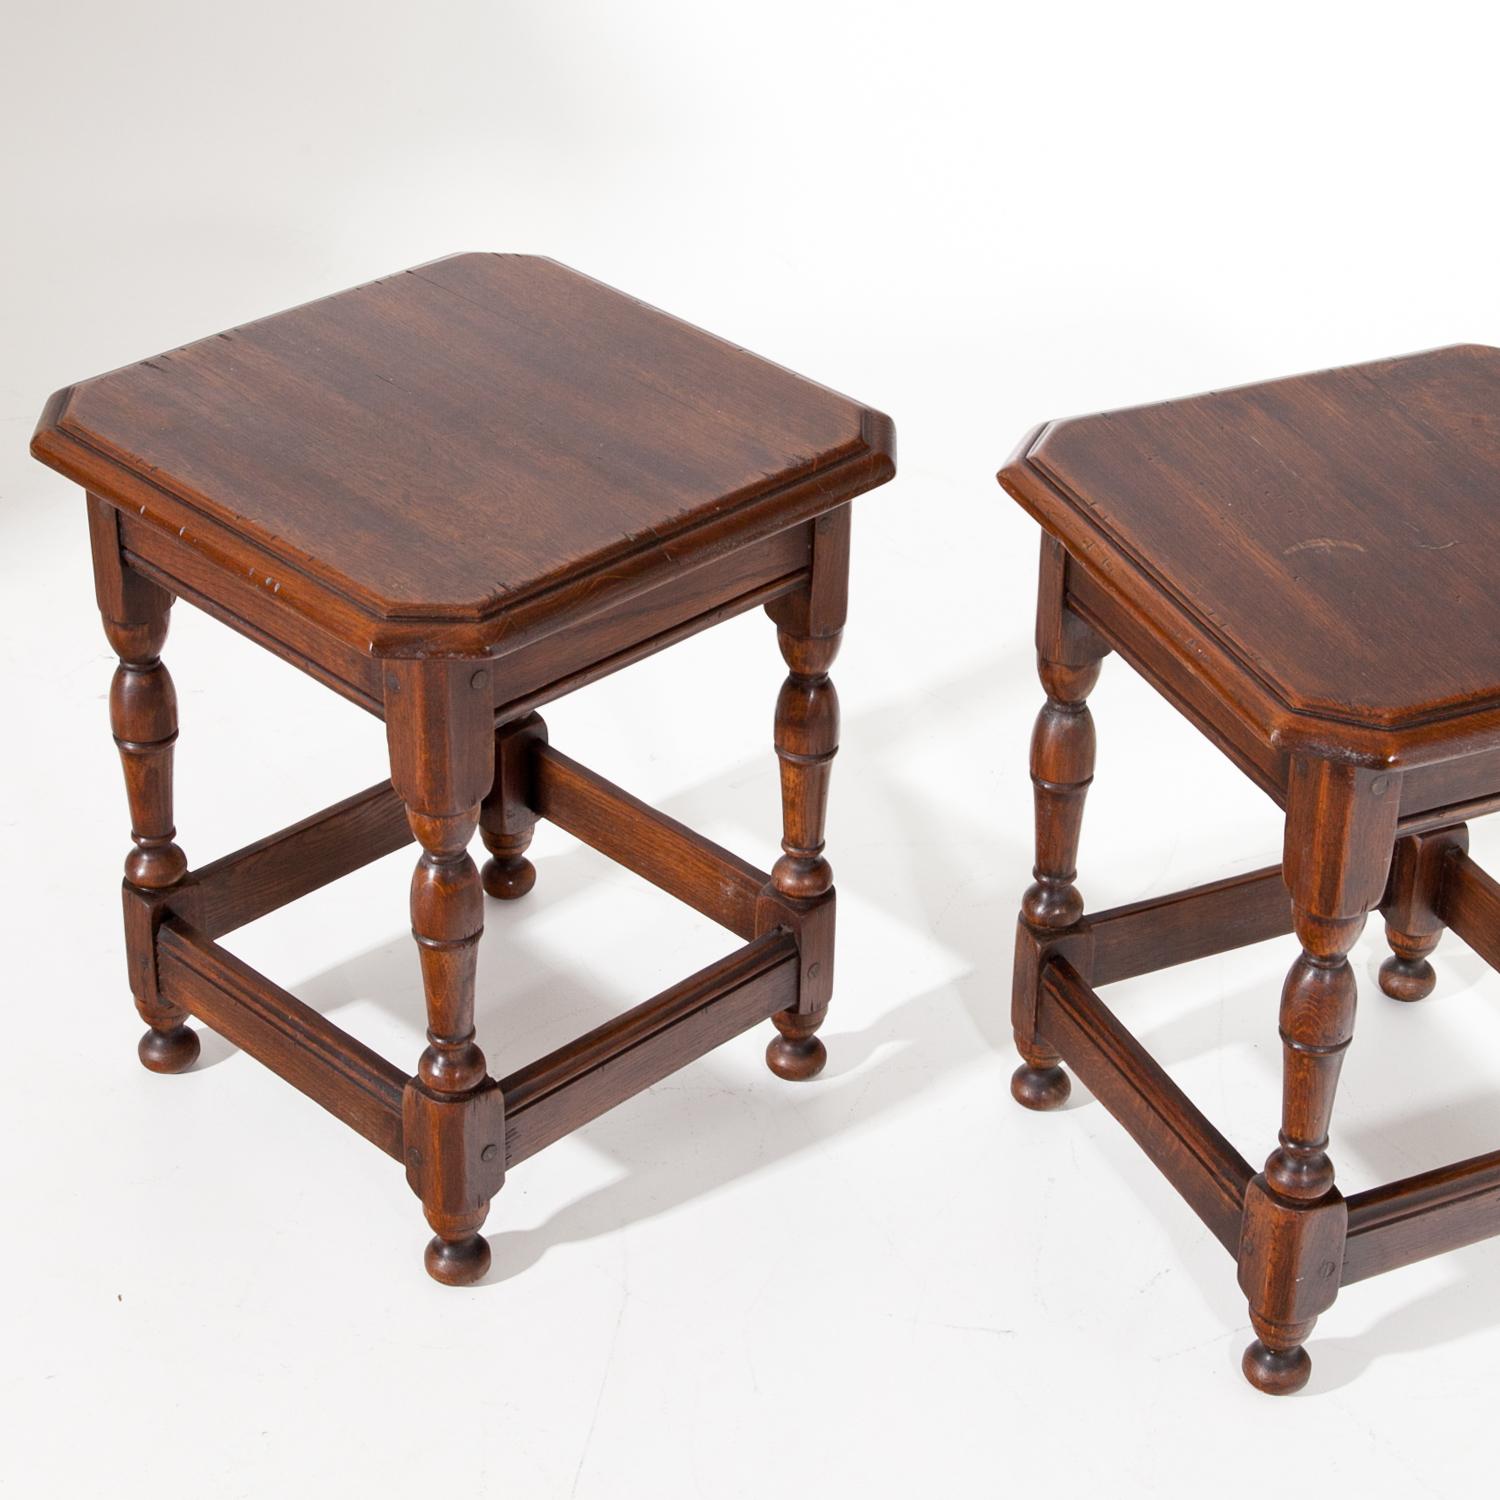 European Pair of Side Tables, 19th-20th Century